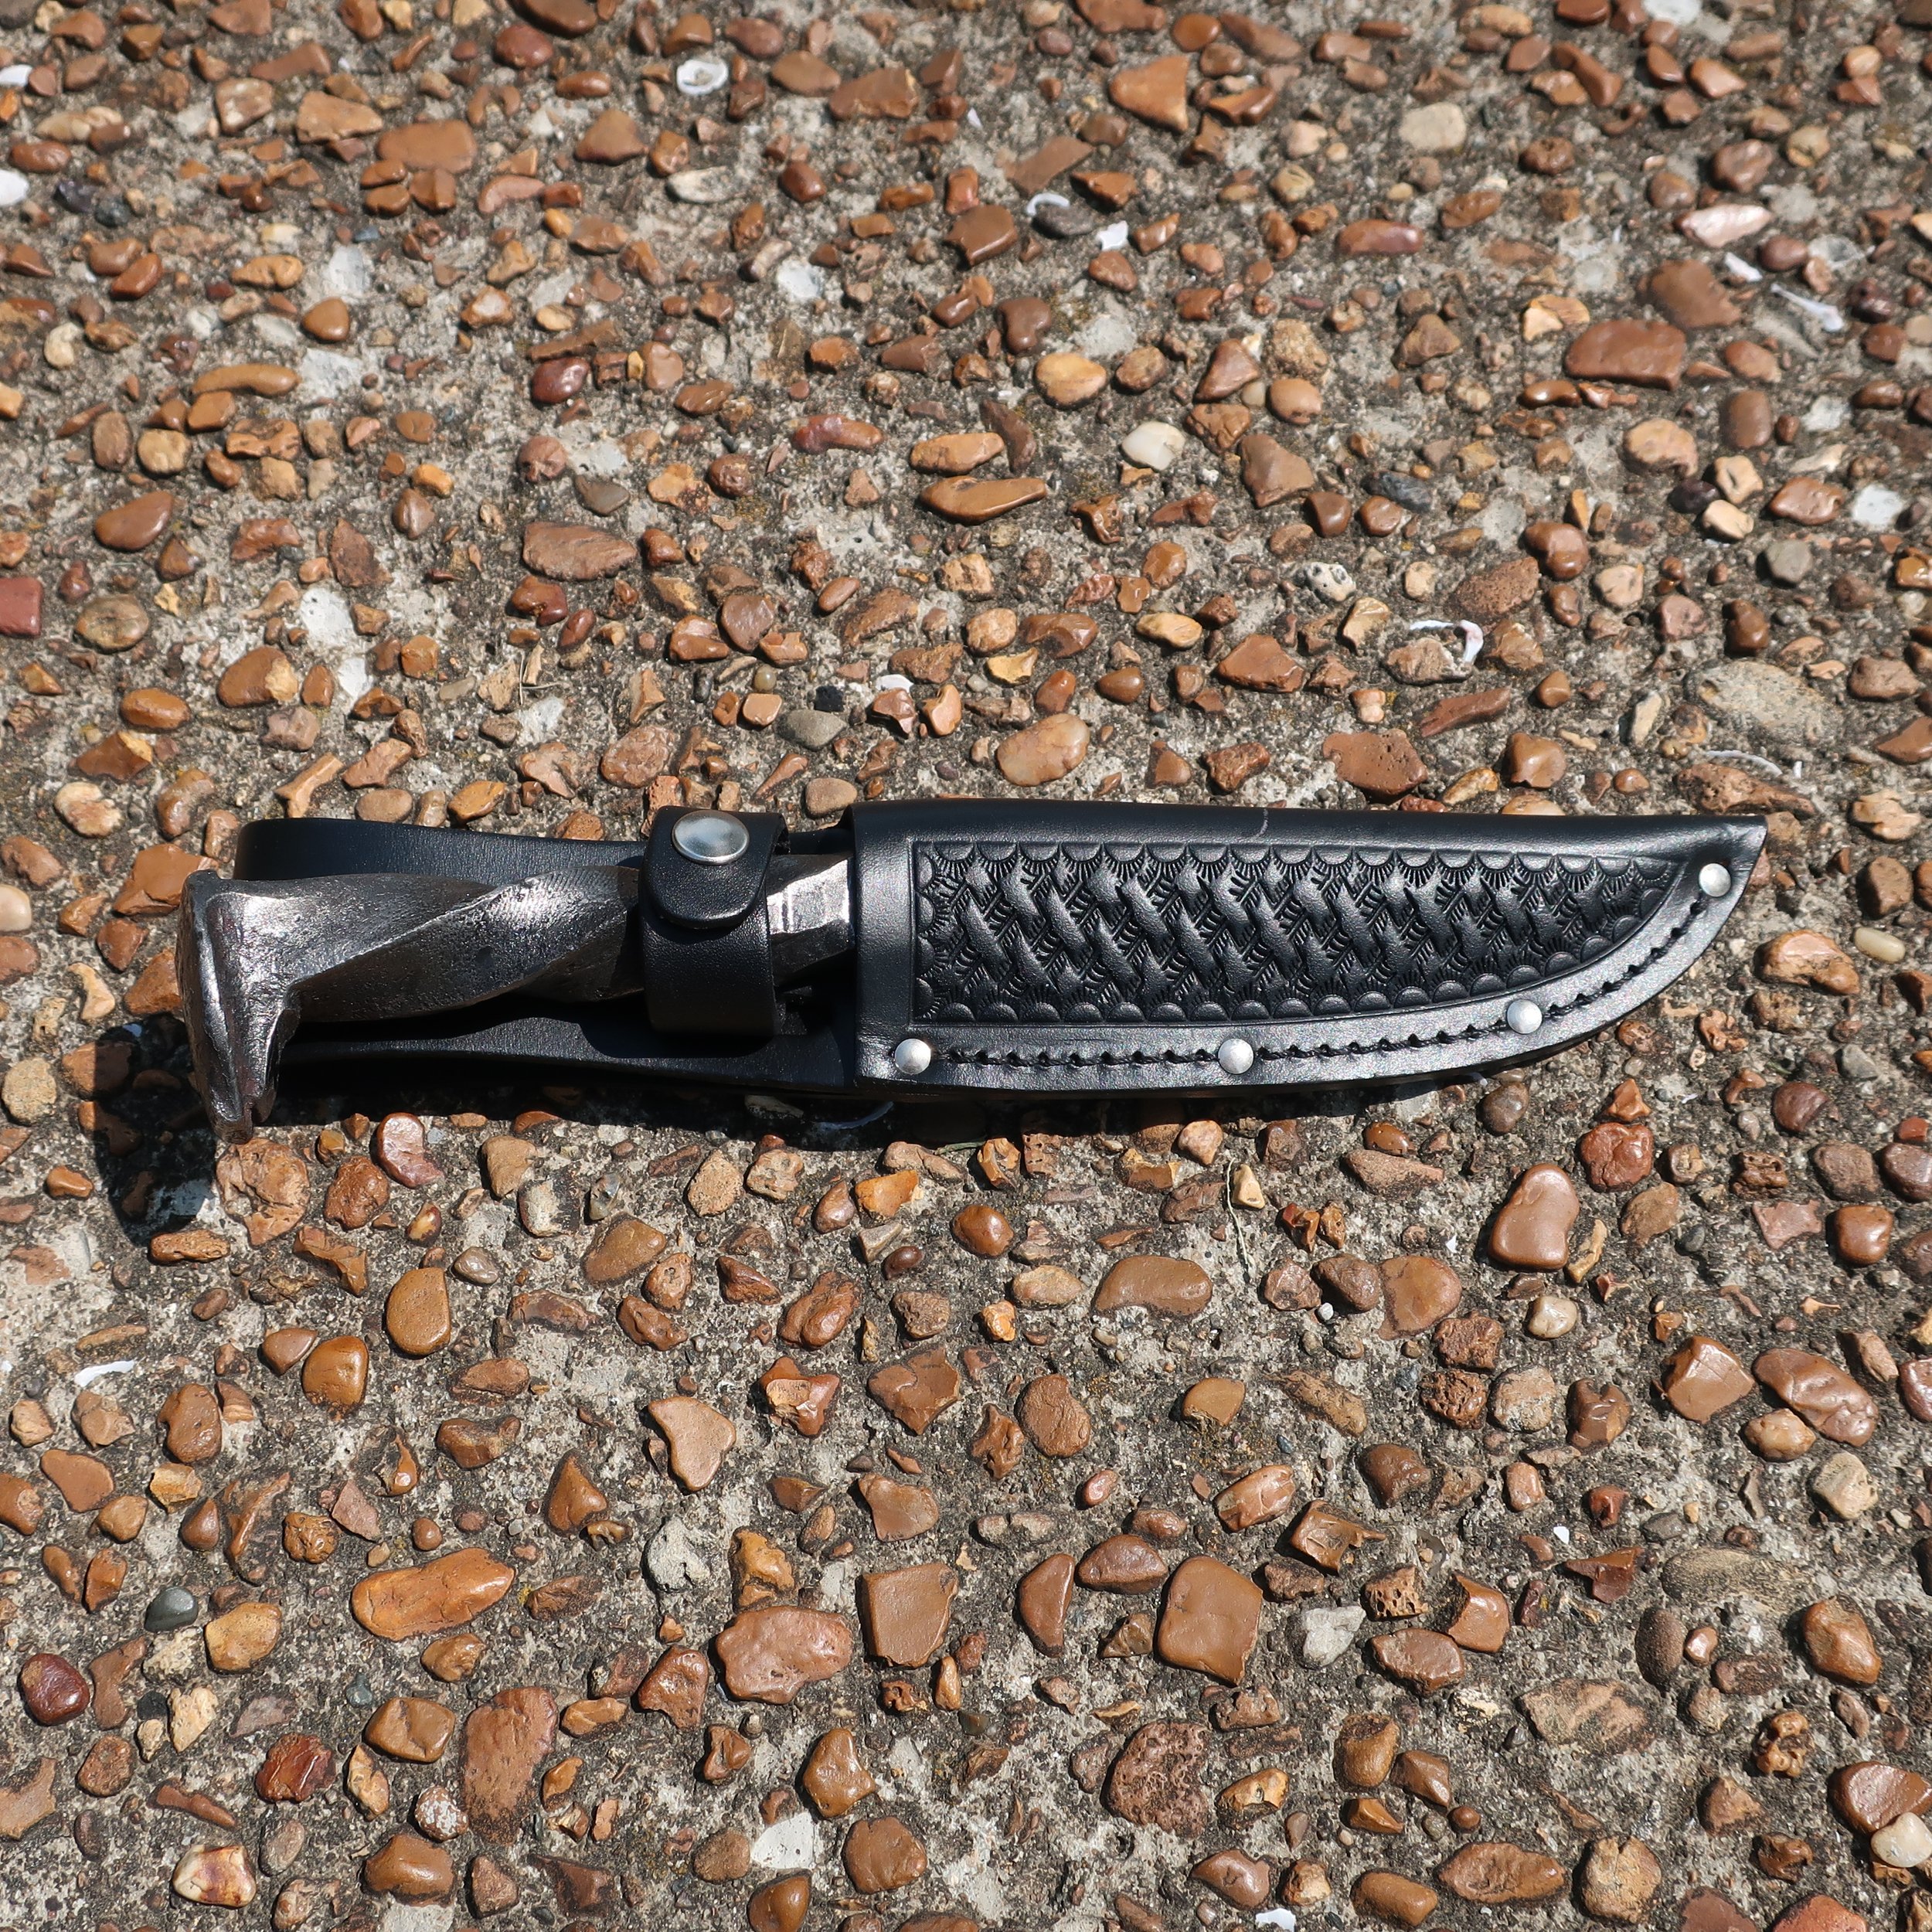 Hand Forged Railroad Spike Knife with Leather Sheath — The Copper